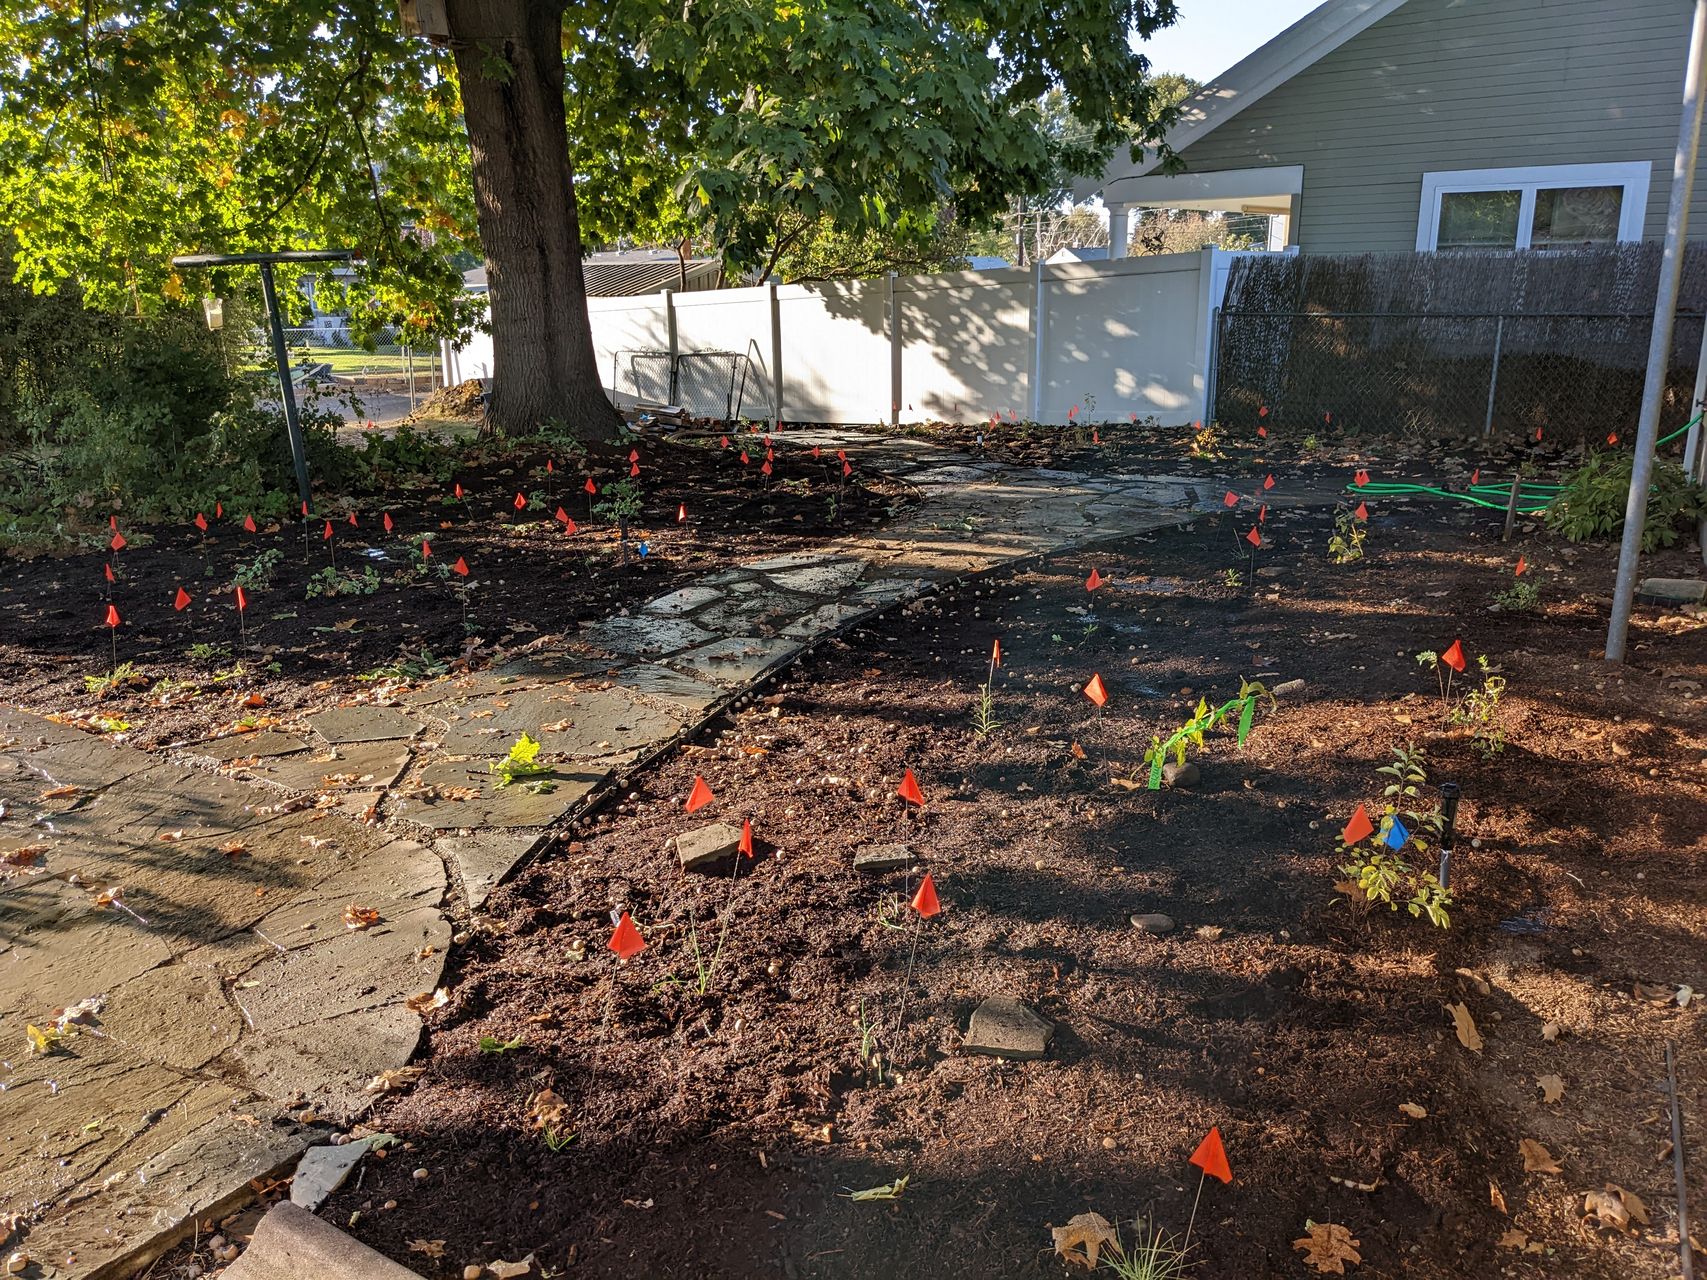 wide angle view of all the plants in the ground, showing flags sticking up from the mulch every few feet